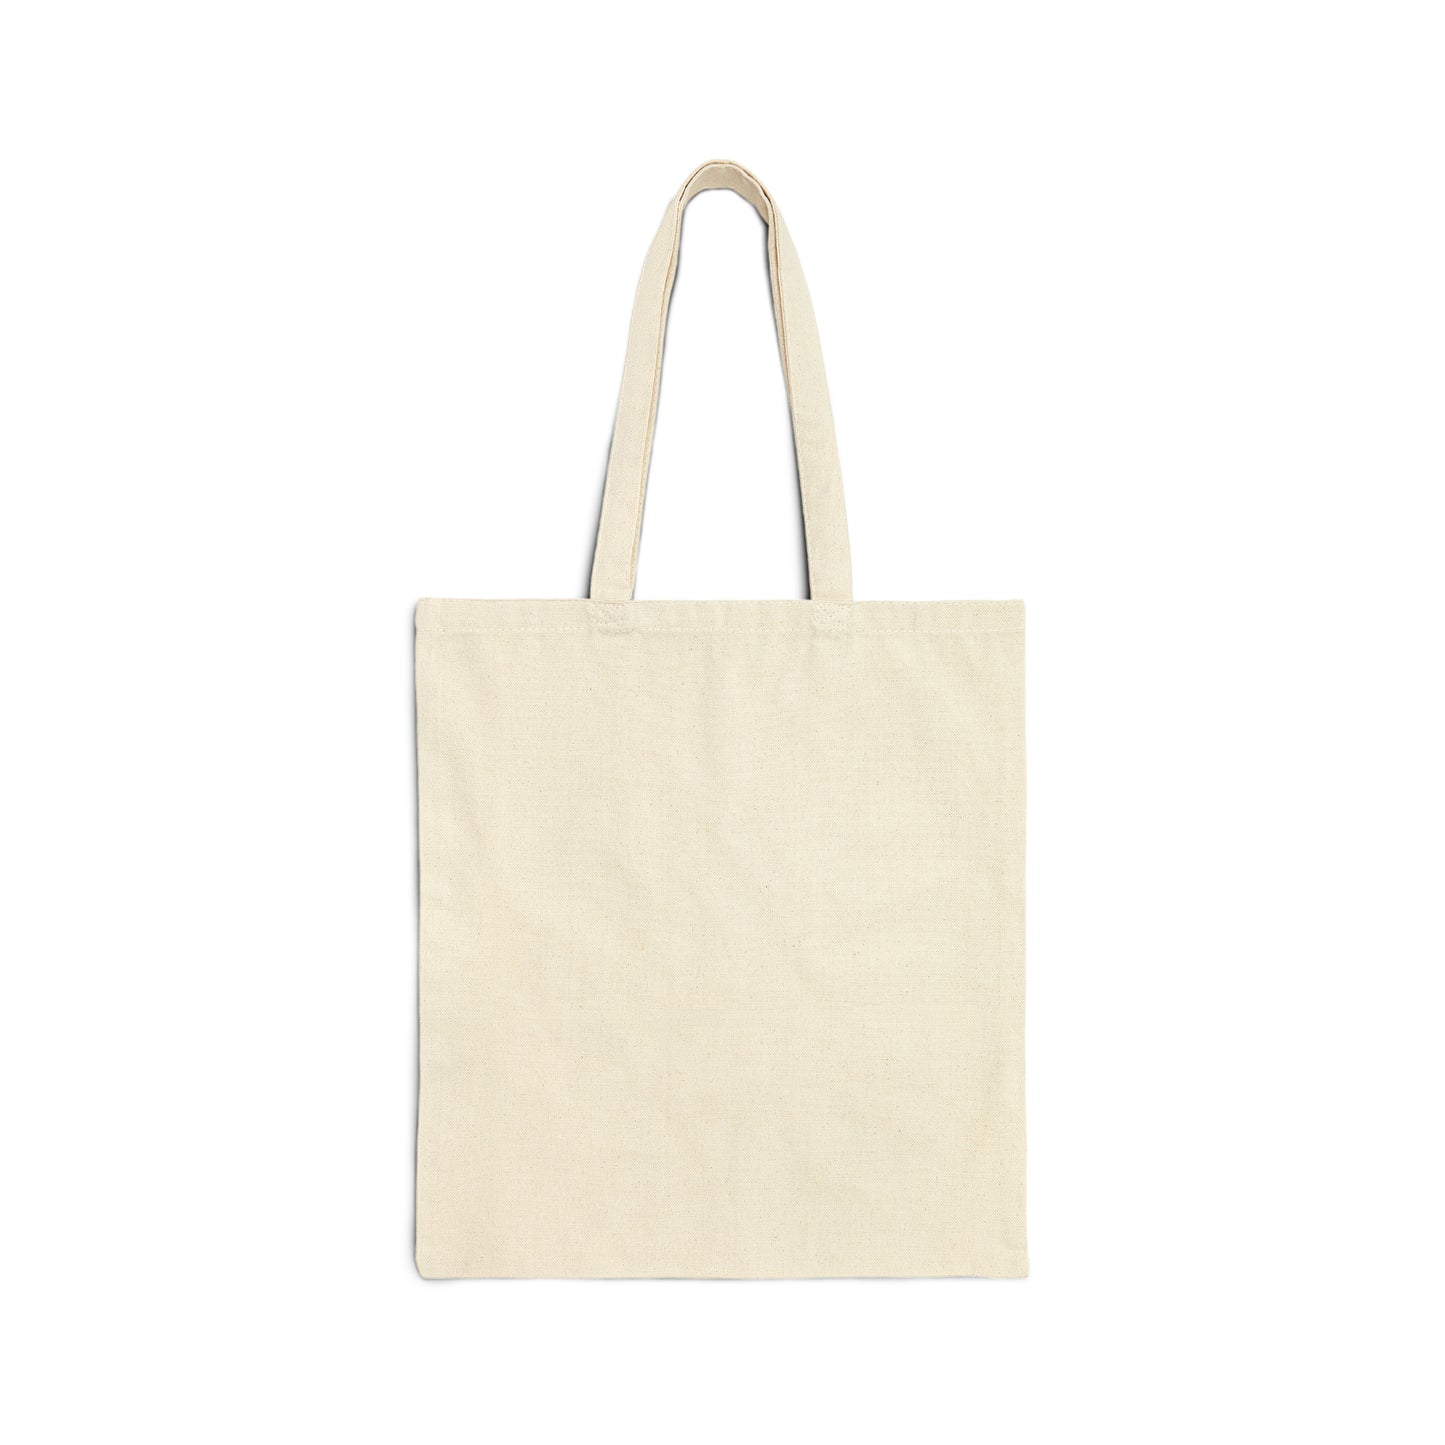 The World Is Better With You Tote Bag